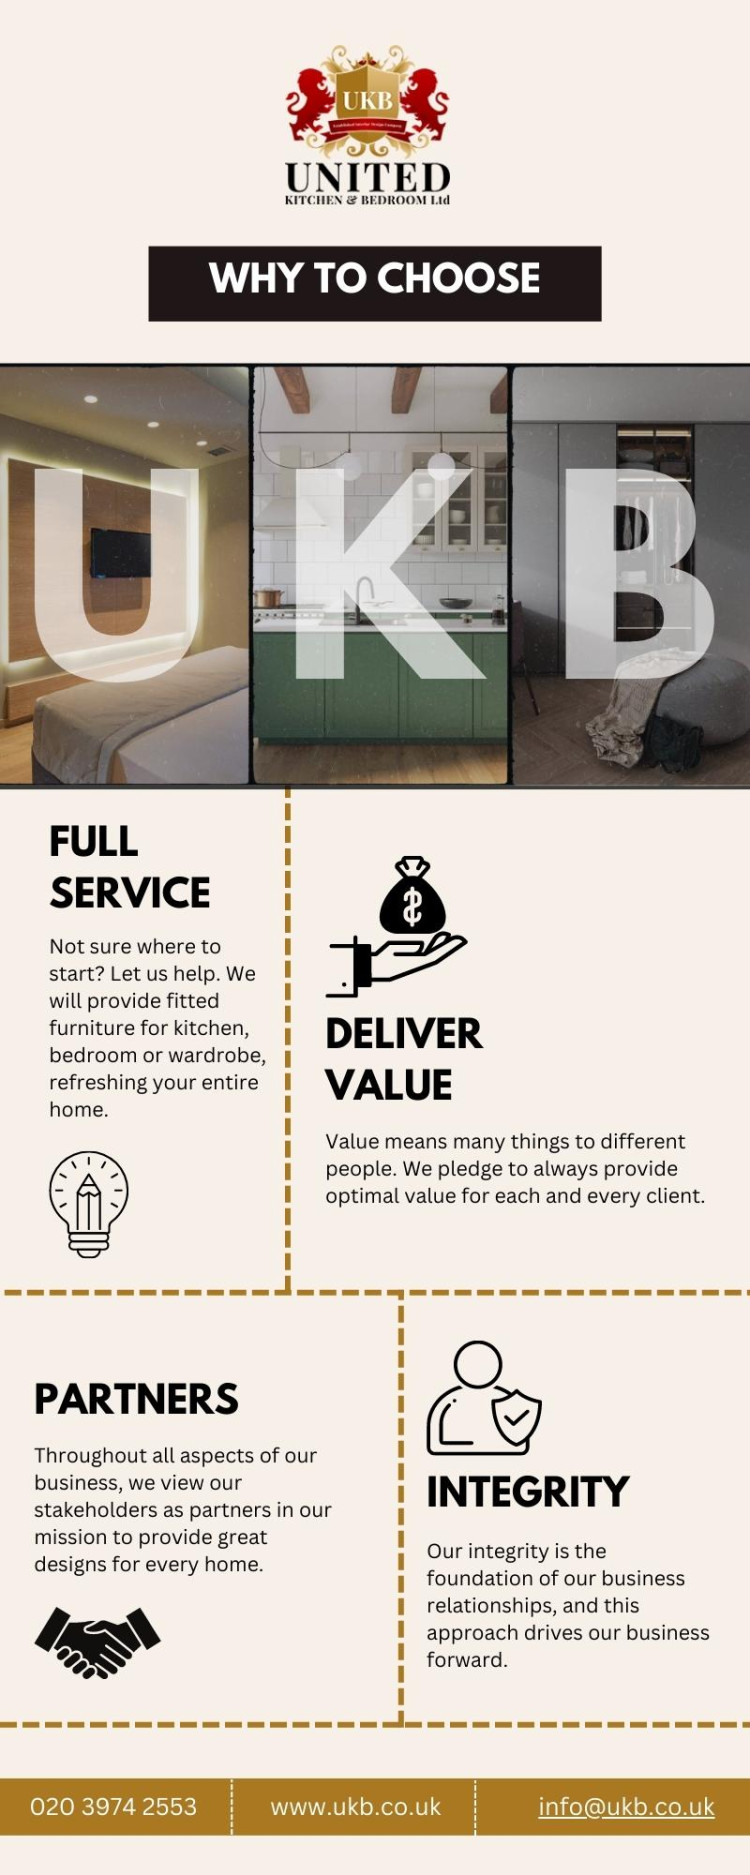 We believe in collaborative relationships with our clients and stakeholders. Discover how UKB embraces a partnership approach to deliver outstanding designs and bring your vision to life. Let's partner together for your dream home. Get in touch!

https://ukb.co.uk/